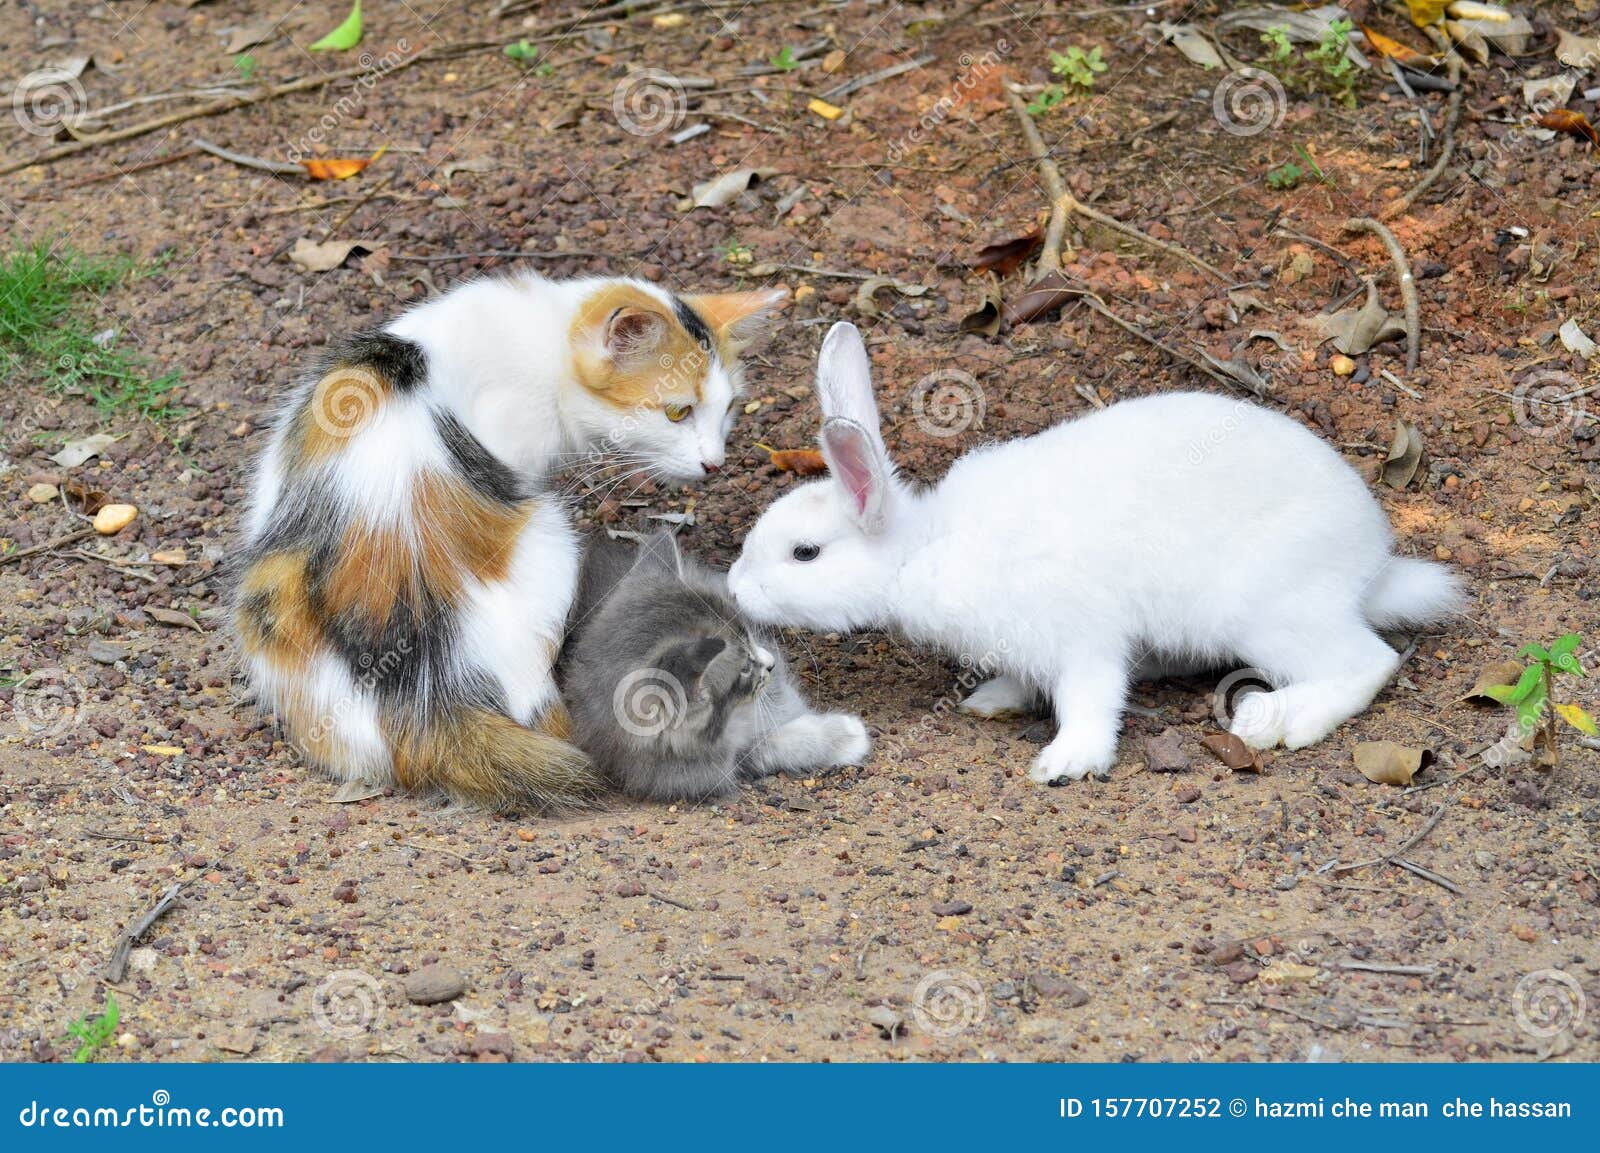 Rabbit And Cats Play Together At The Park Stock Photo Image of